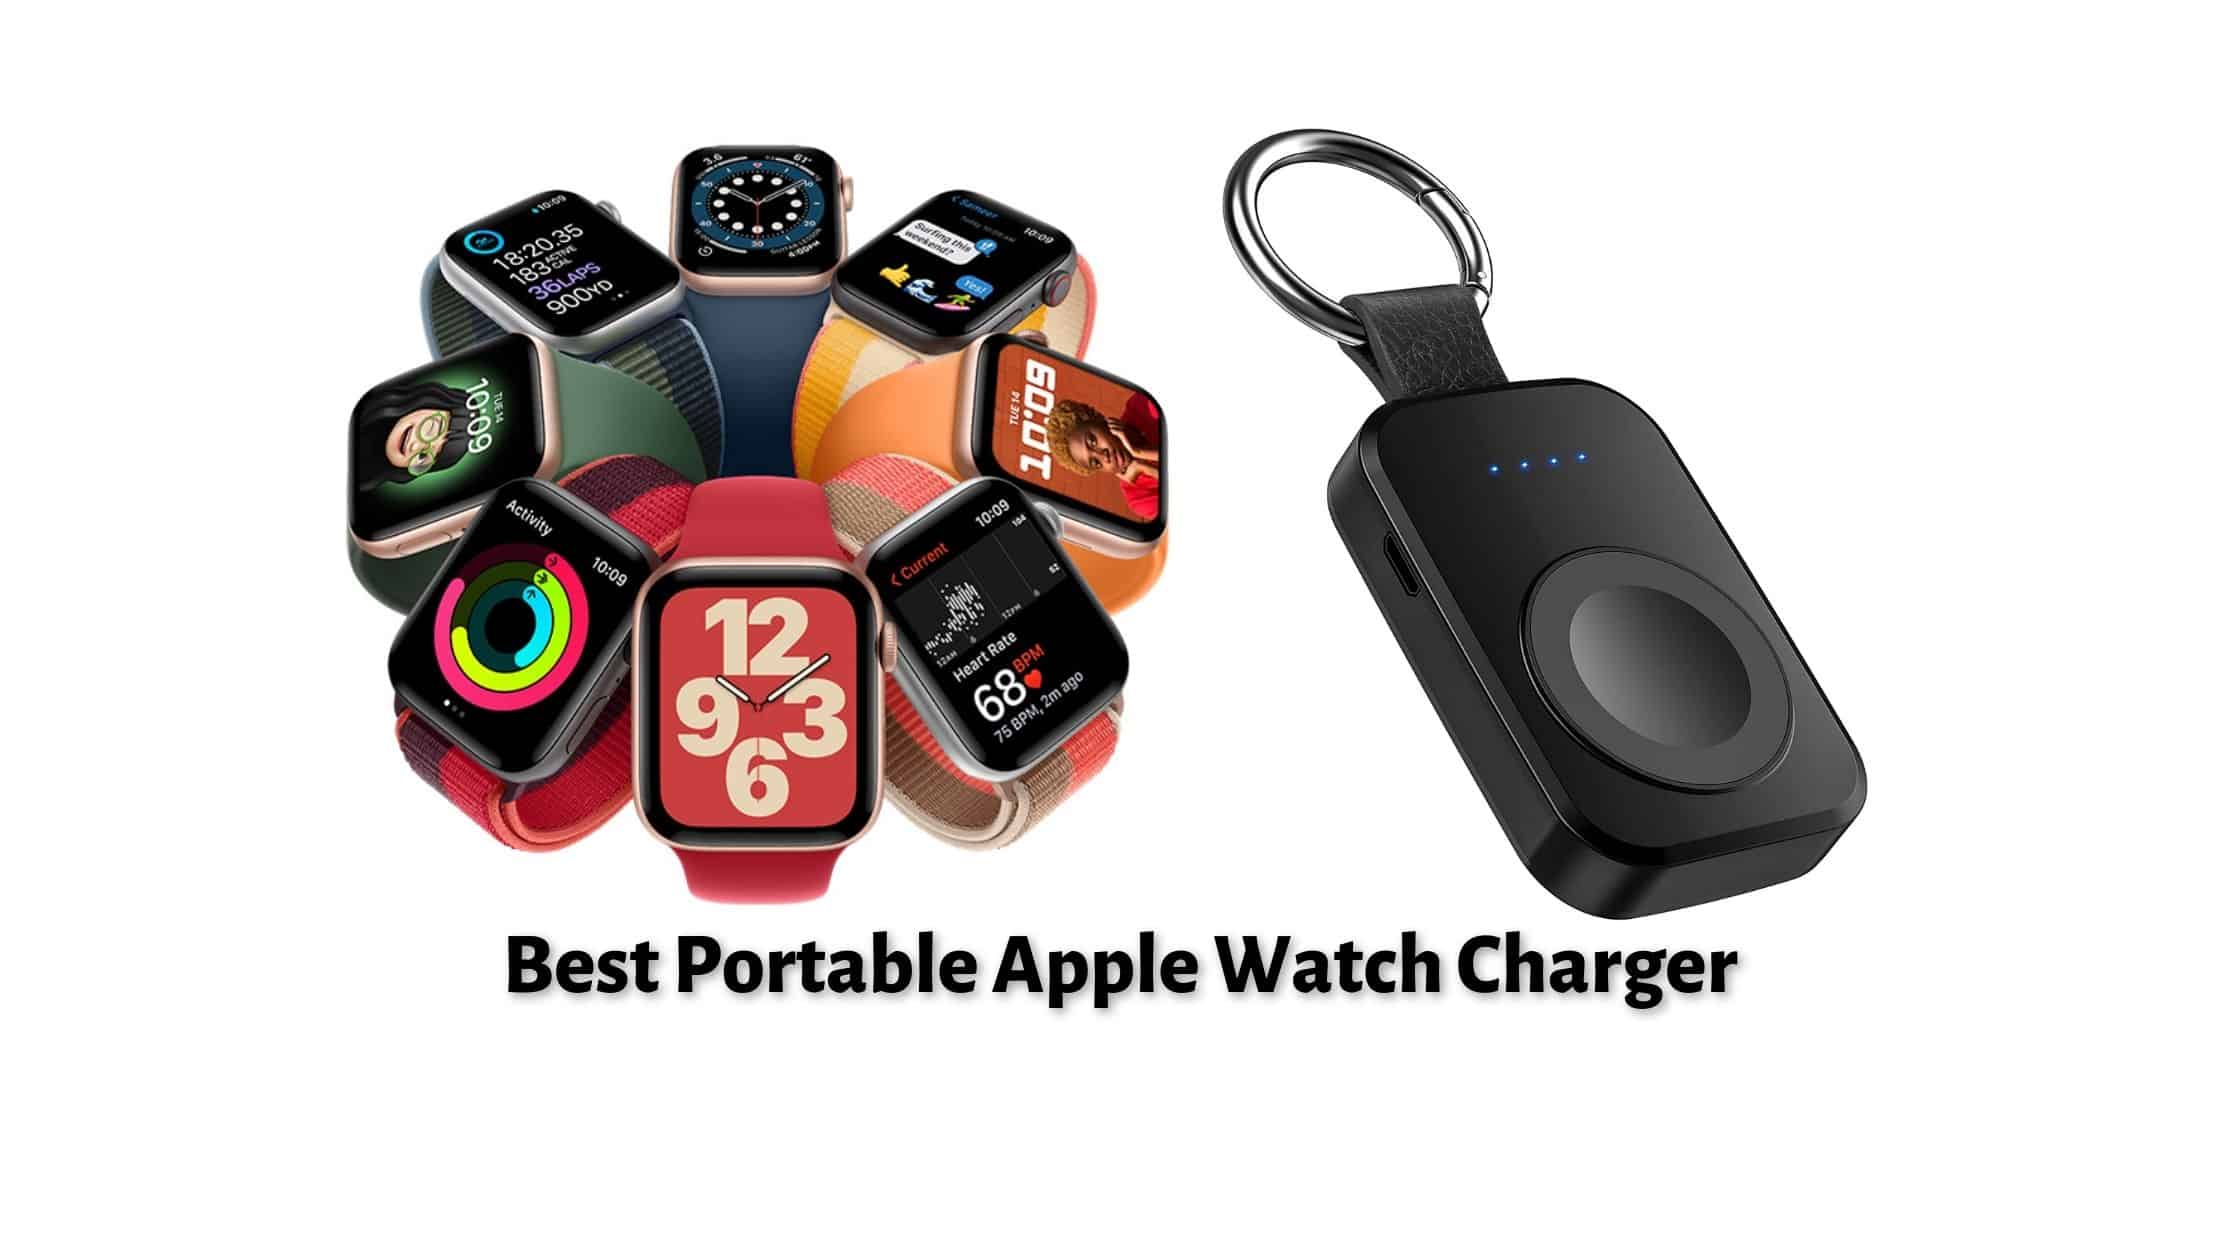 The 10 Best Portable Apple Watch Chargers | Portable Travel Chargers for  the Apple Watch in 2023 - Stupid Apple Rumors